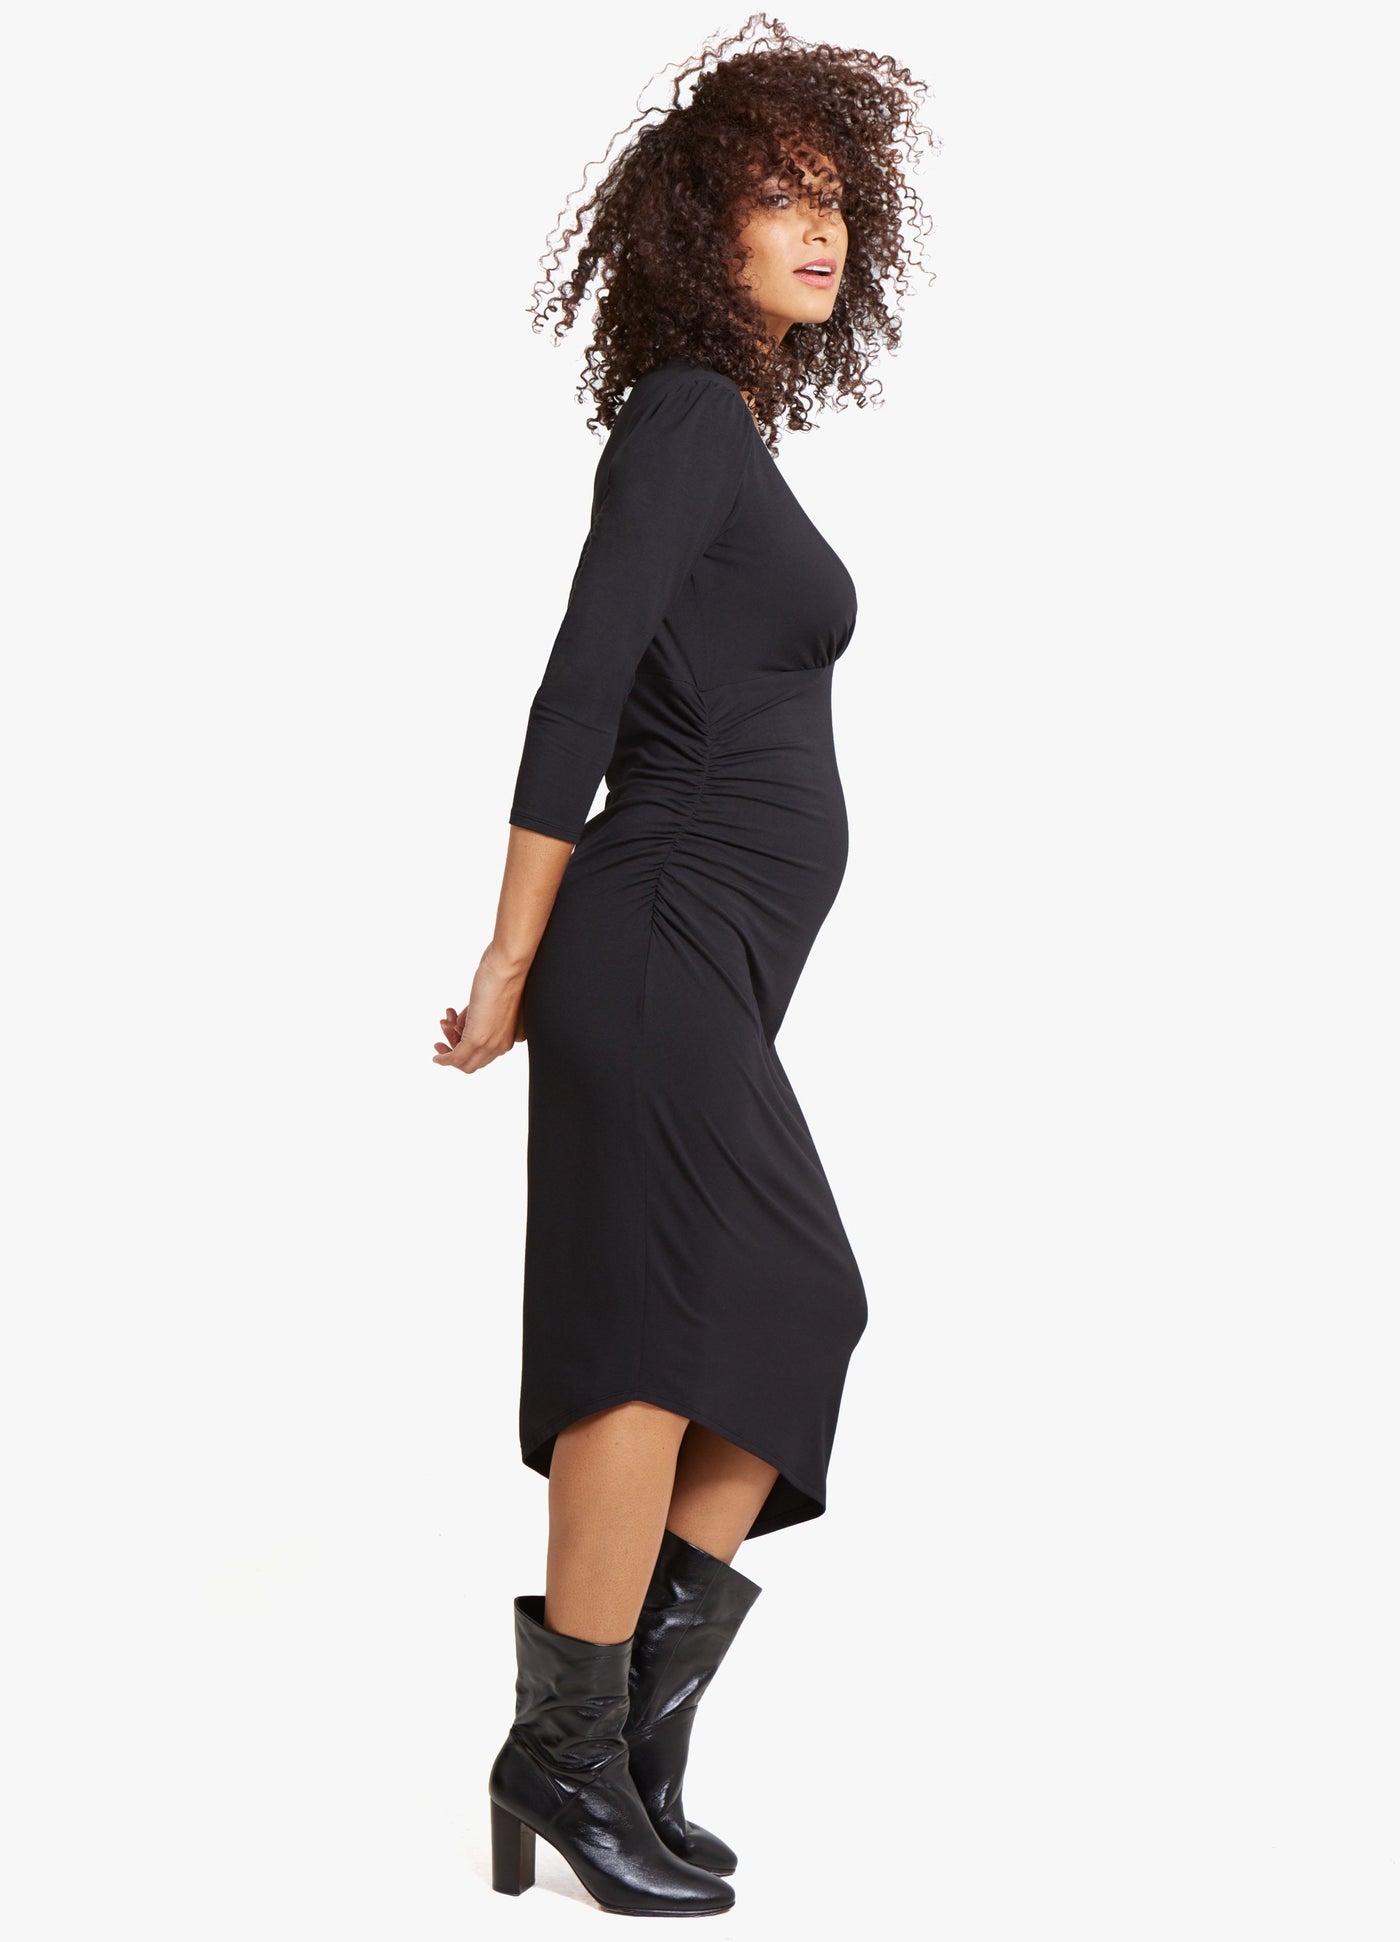 Model is 5’10”, 4 months pregnant, and wears size S.||Black::hover